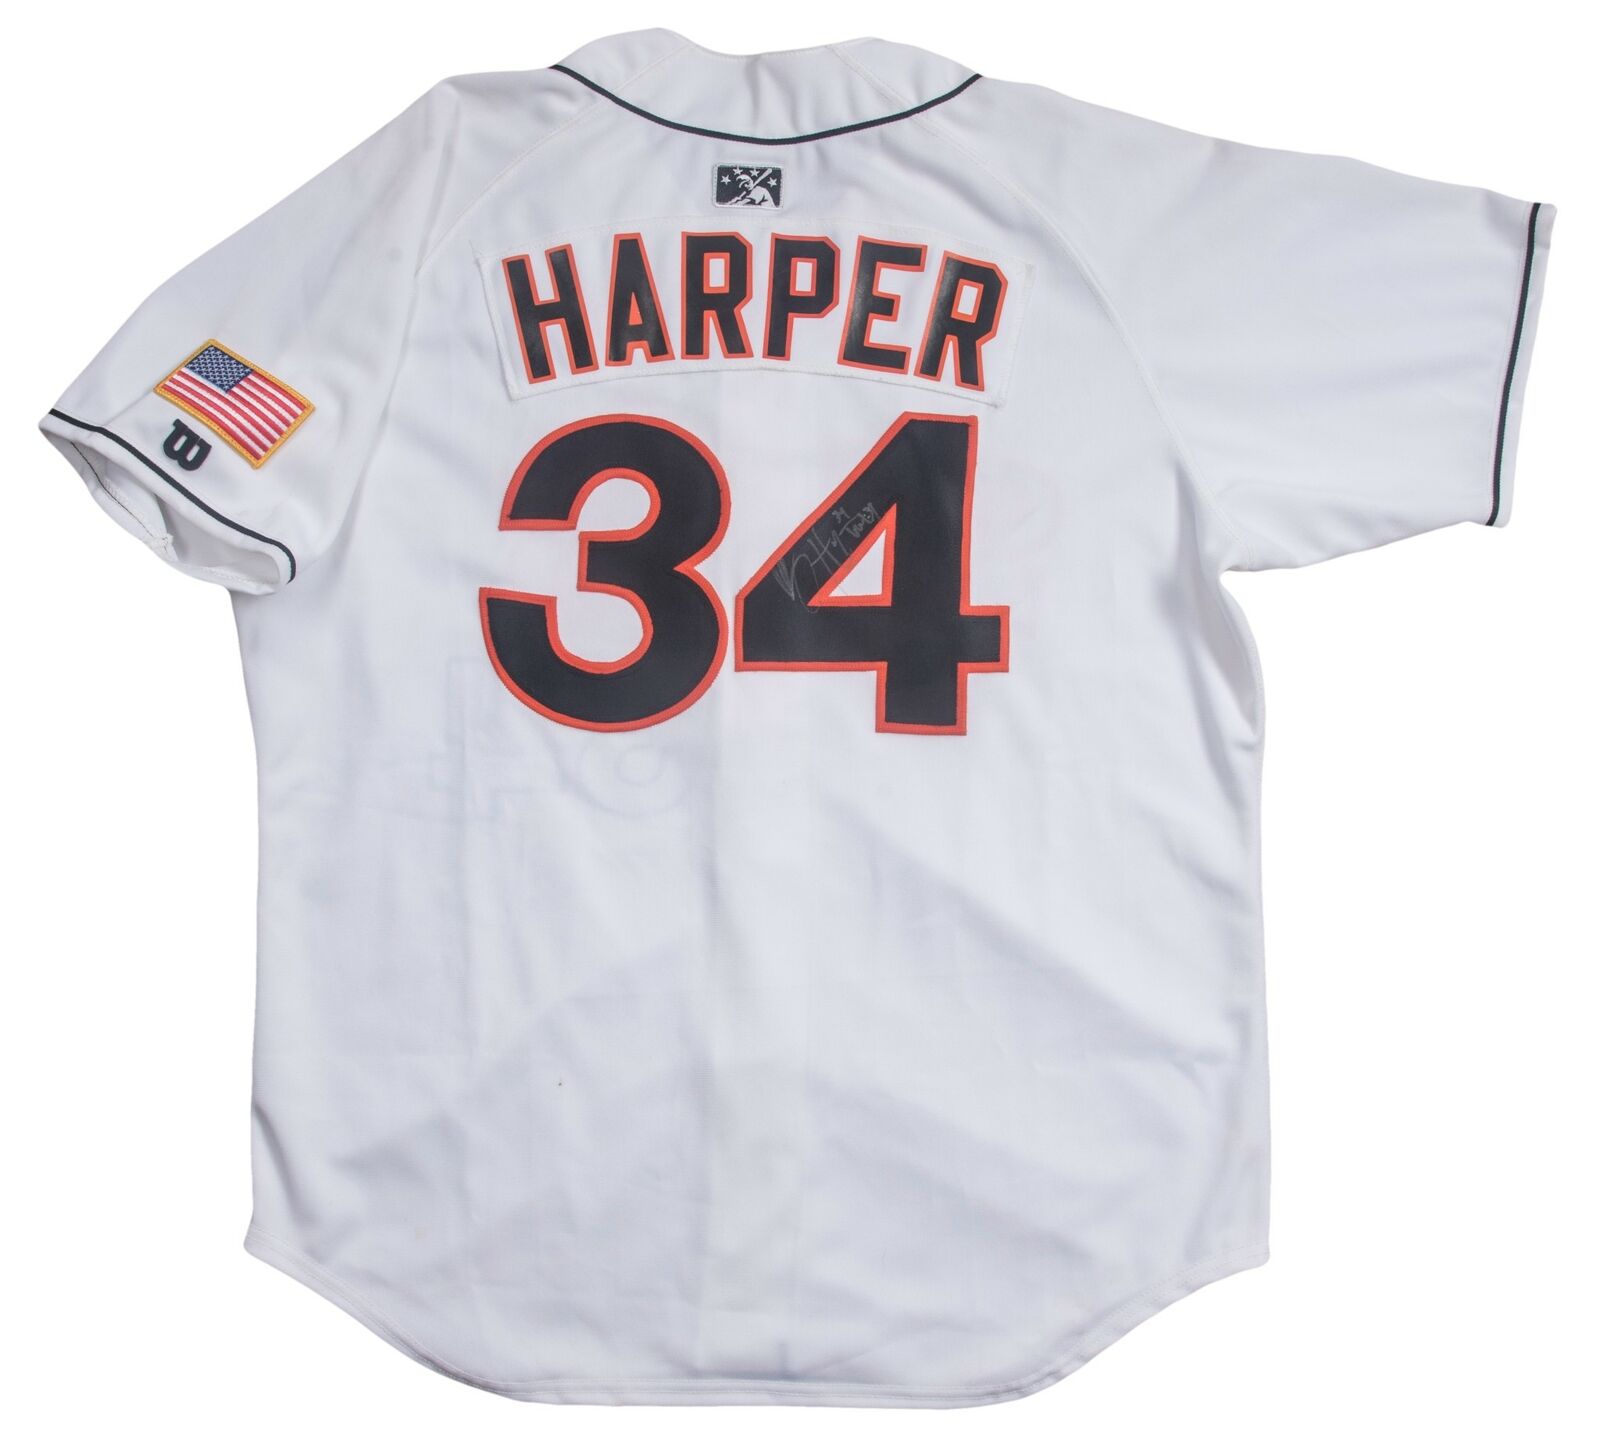 2011 Bryce Harper Rookie Signed Game Used Minor League Suns Jersey Beckett COA